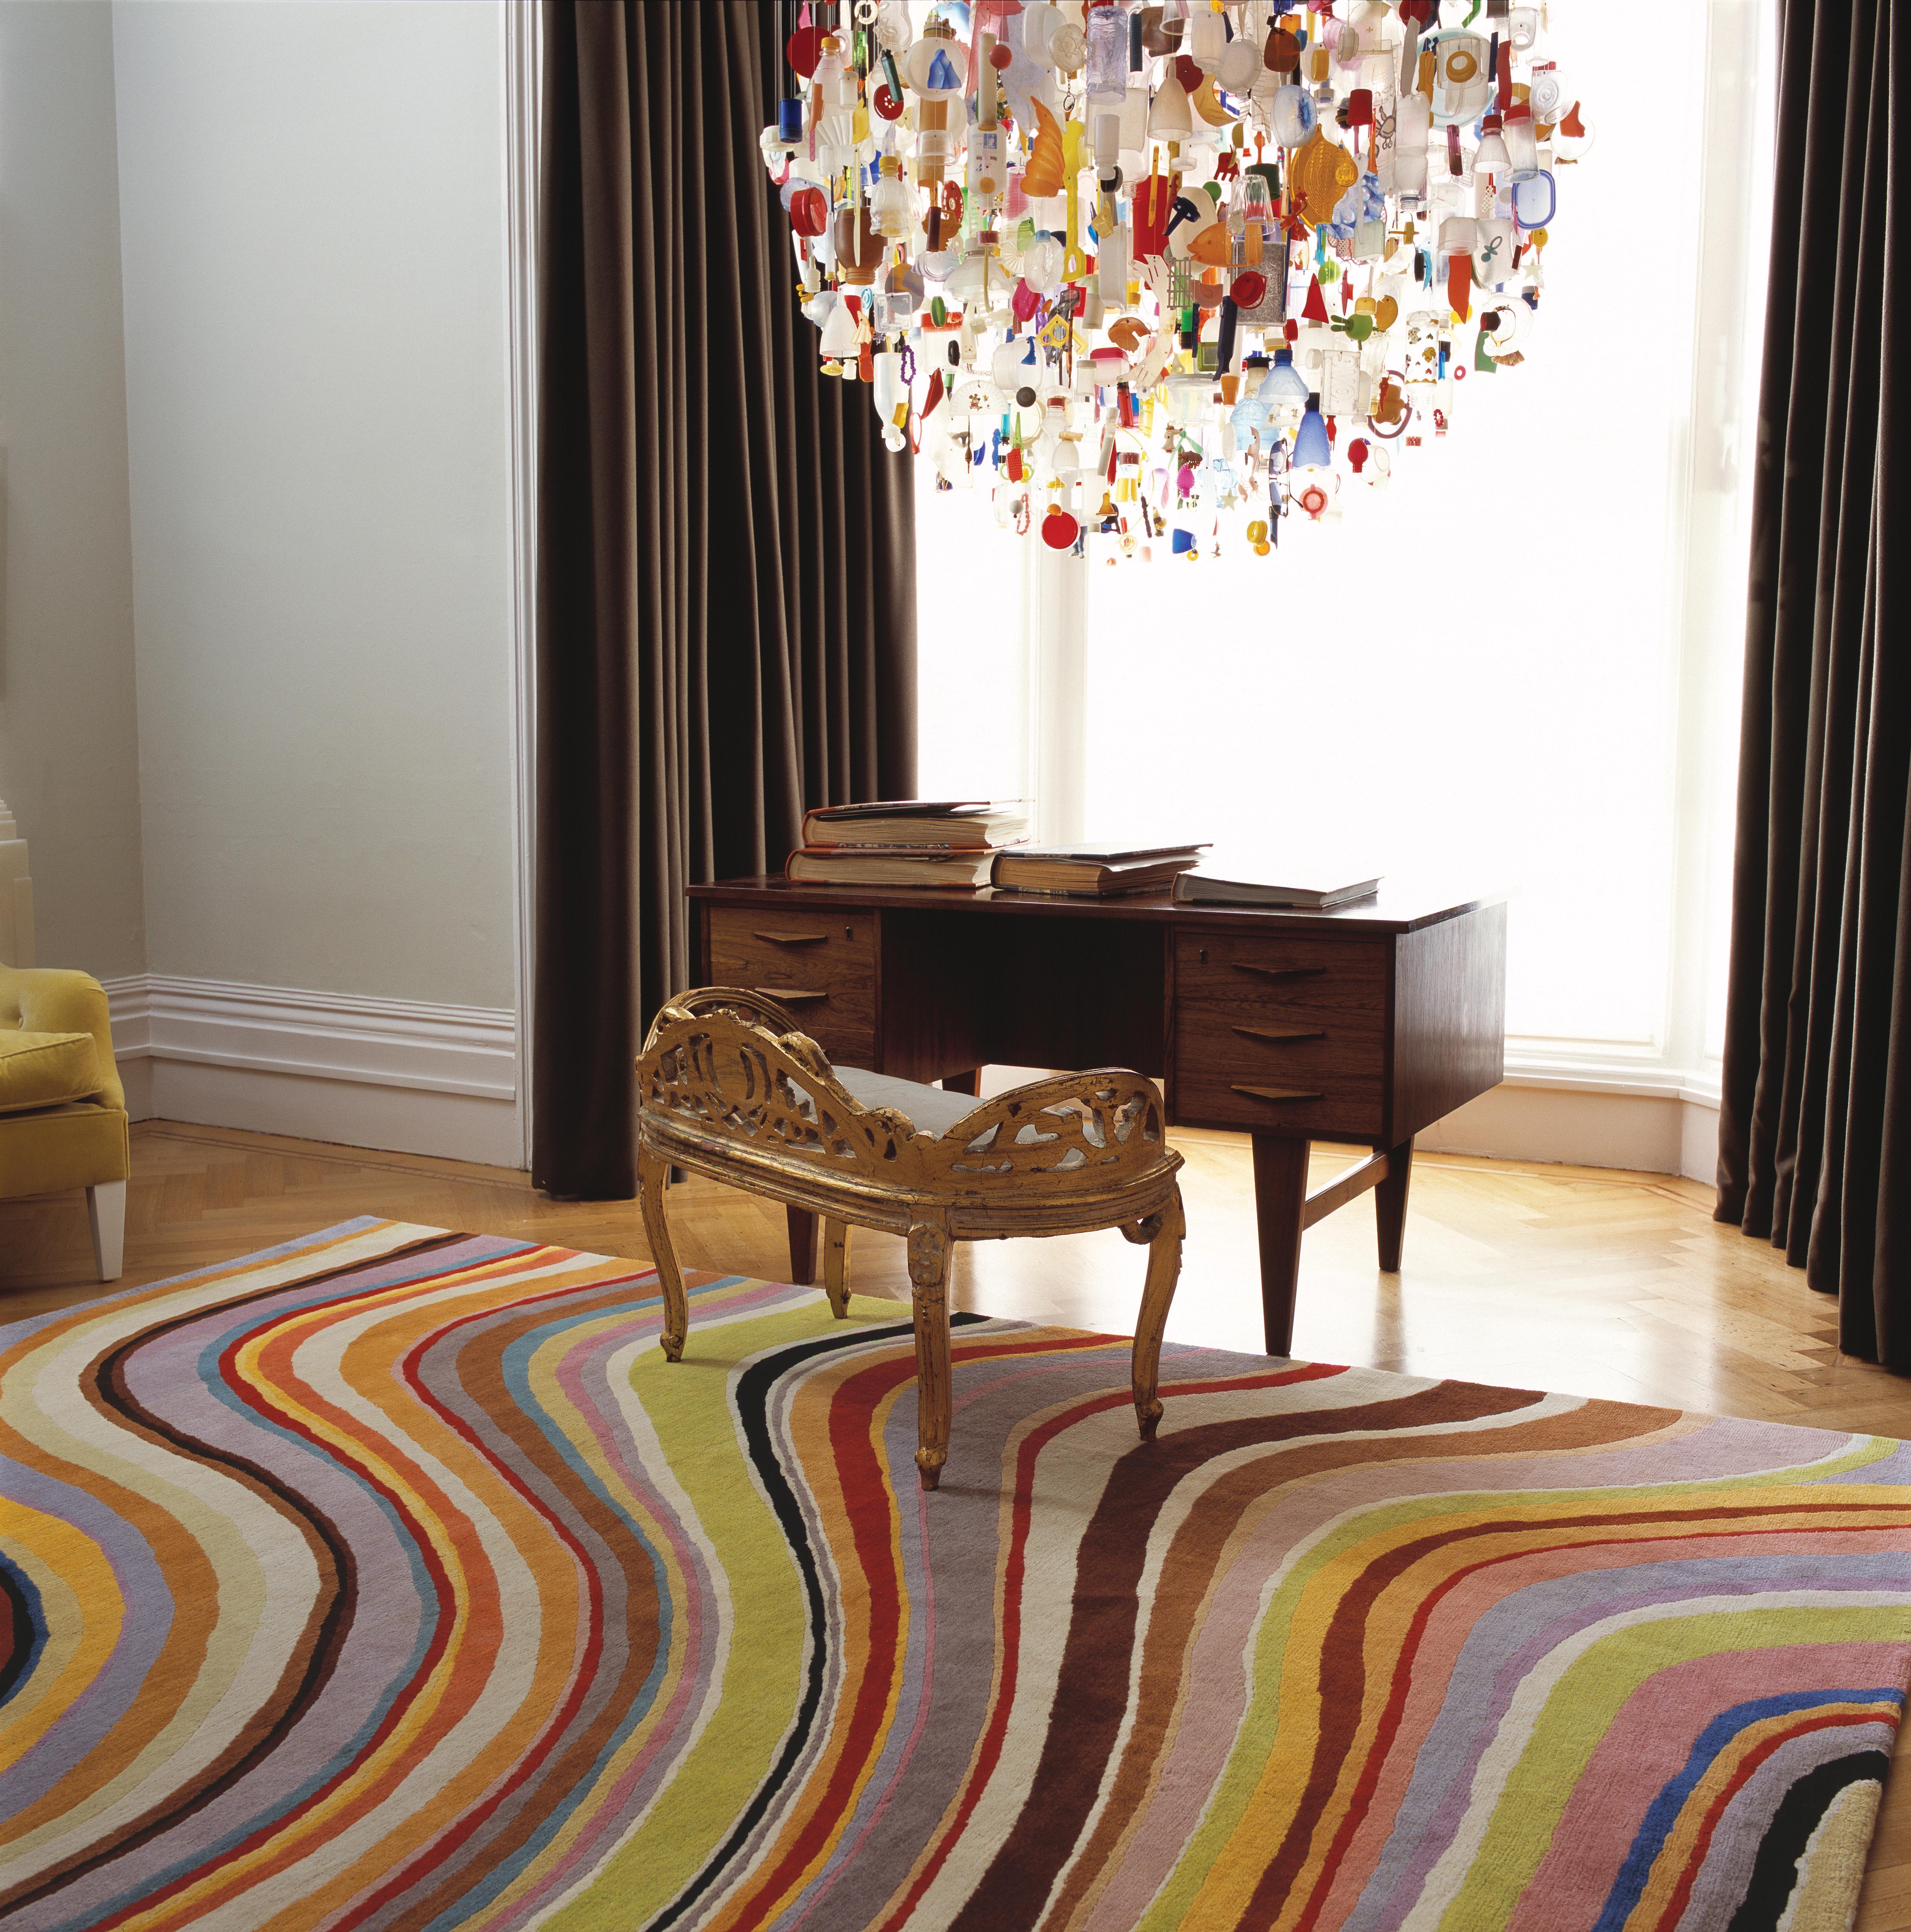 Paul Smith's signature Swirl is instantly recognizable as a work of graphic genius. In washed-out, muted tones of pale olive, ginger, grey and cream, this hand-knotted rug in pure Tibetan wool is an ultimate expression of this iconic